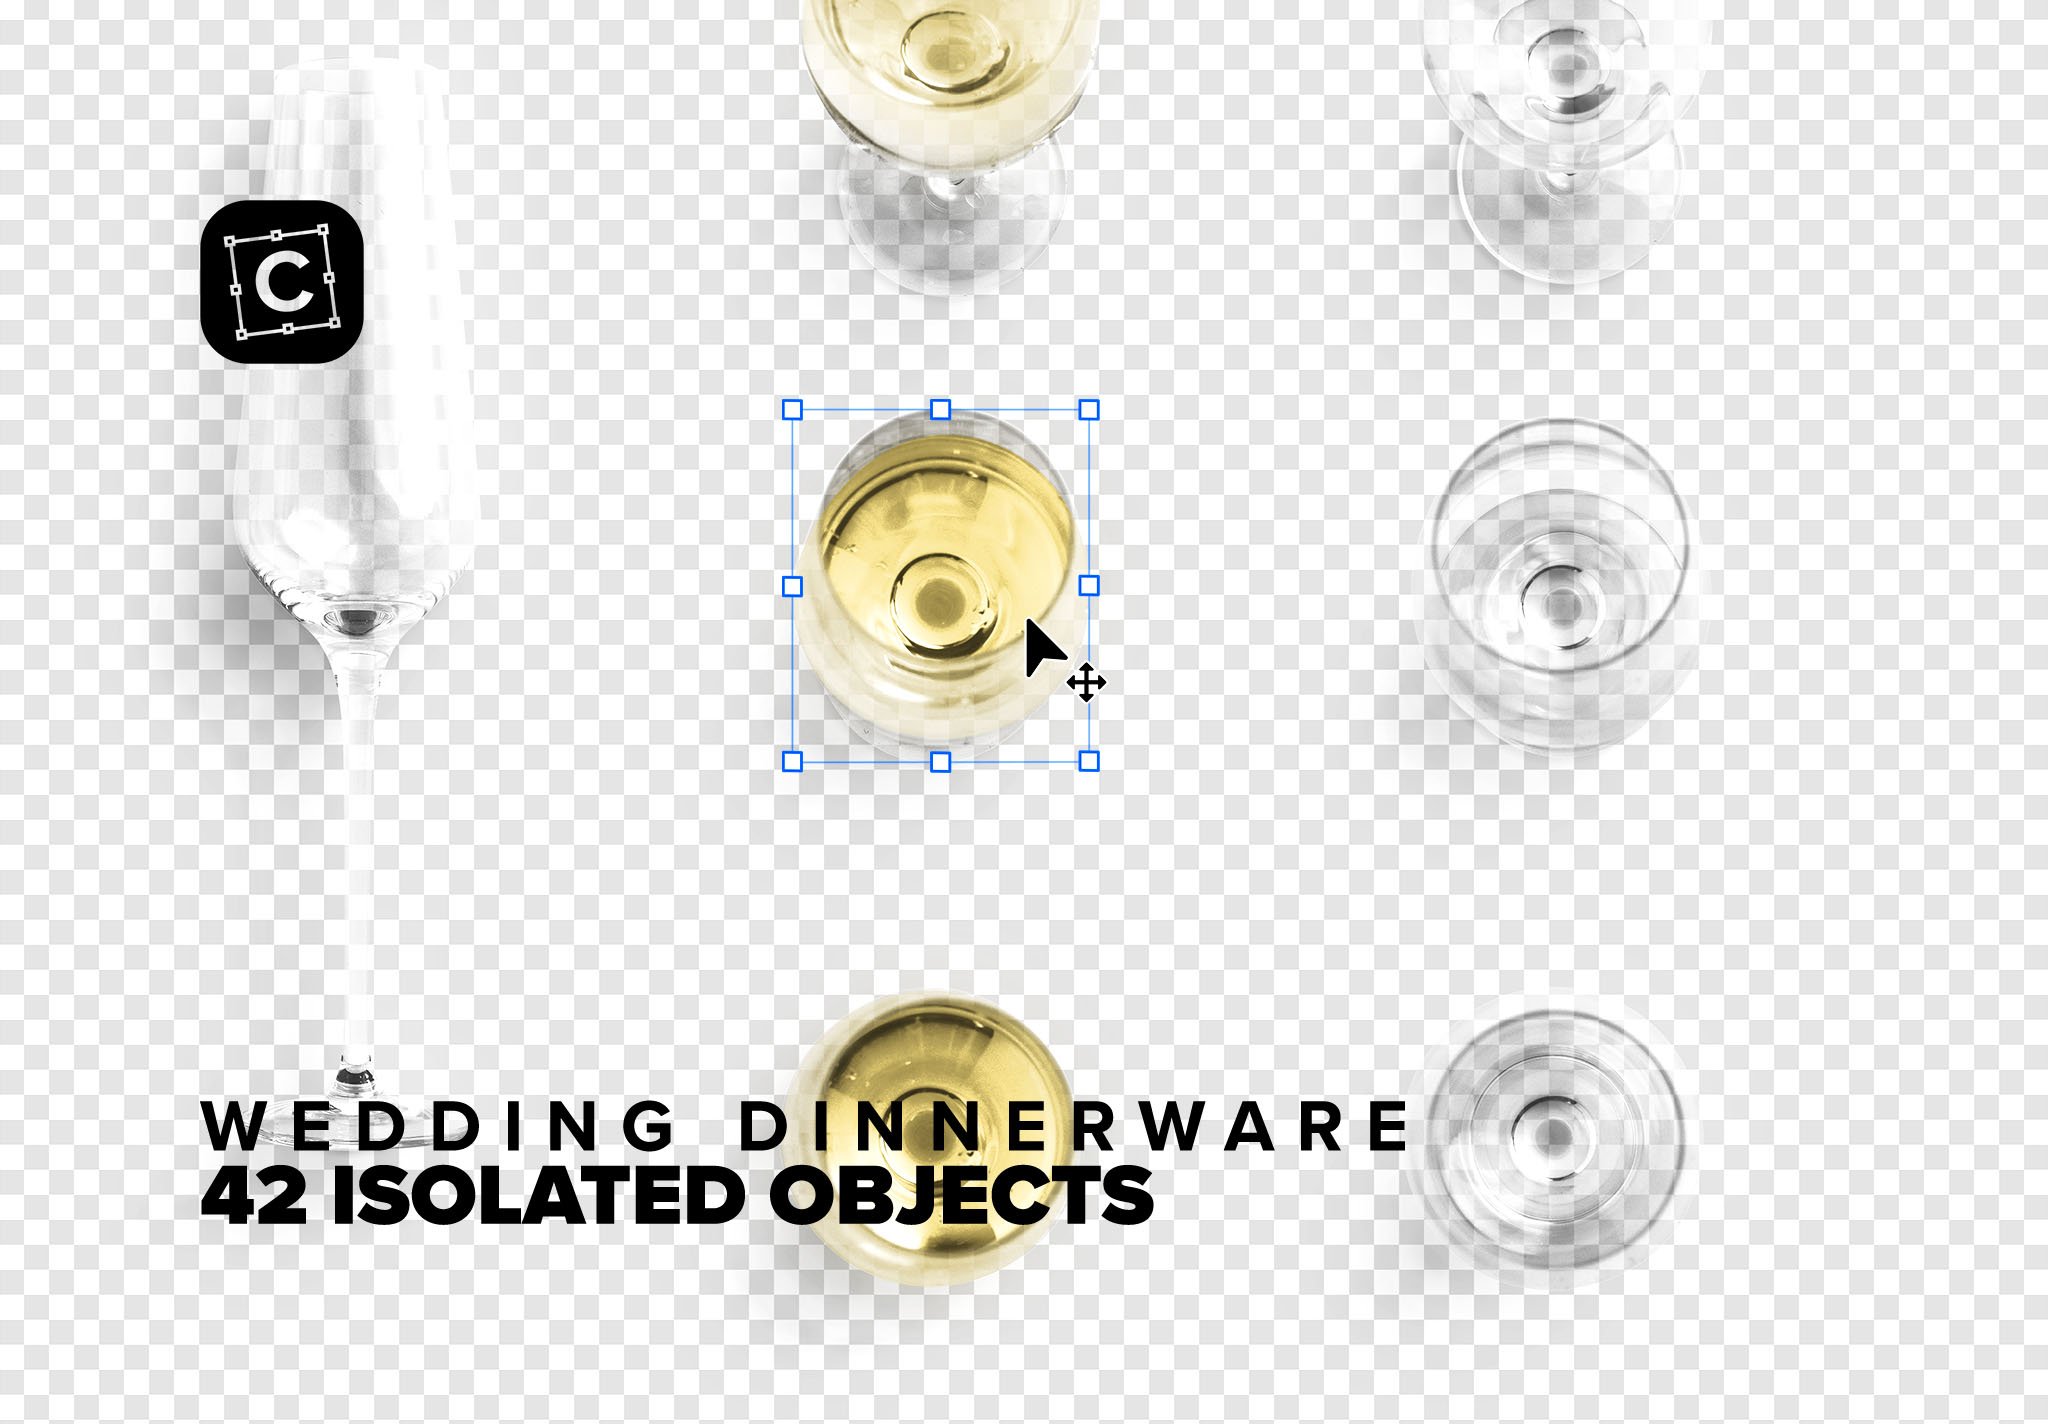 wedding dinnerware 03 isolated objects 80